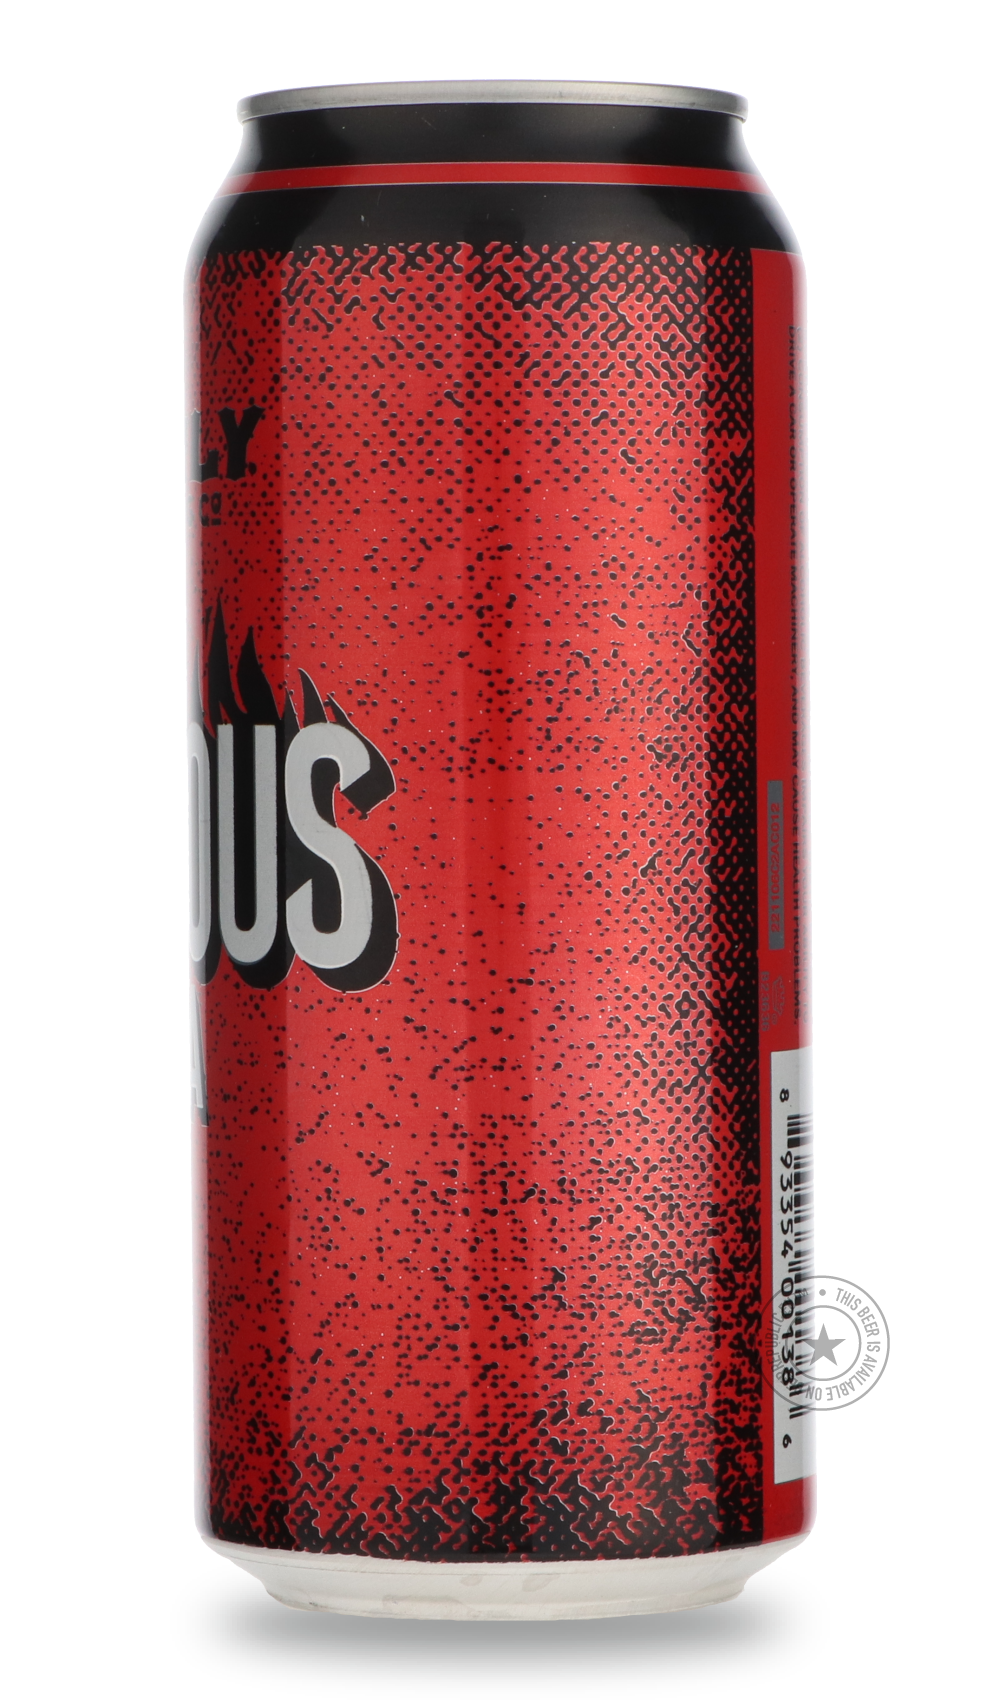 -Surly- Furious [473 ml Can]-IPA- Only @ Beer Republic - The best online beer store for American & Canadian craft beer - Buy beer online from the USA and Canada - Bier online kopen - Amerikaans bier kopen - Craft beer store - Craft beer kopen - Amerikanisch bier kaufen - Bier online kaufen - Acheter biere online - IPA - Stout - Porter - New England IPA - Hazy IPA - Imperial Stout - Barrel Aged - Barrel Aged Imperial Stout - Brown - Dark beer - Blond - Blonde - Pilsner - Lager - Wheat - Weizen - Amber - Barl